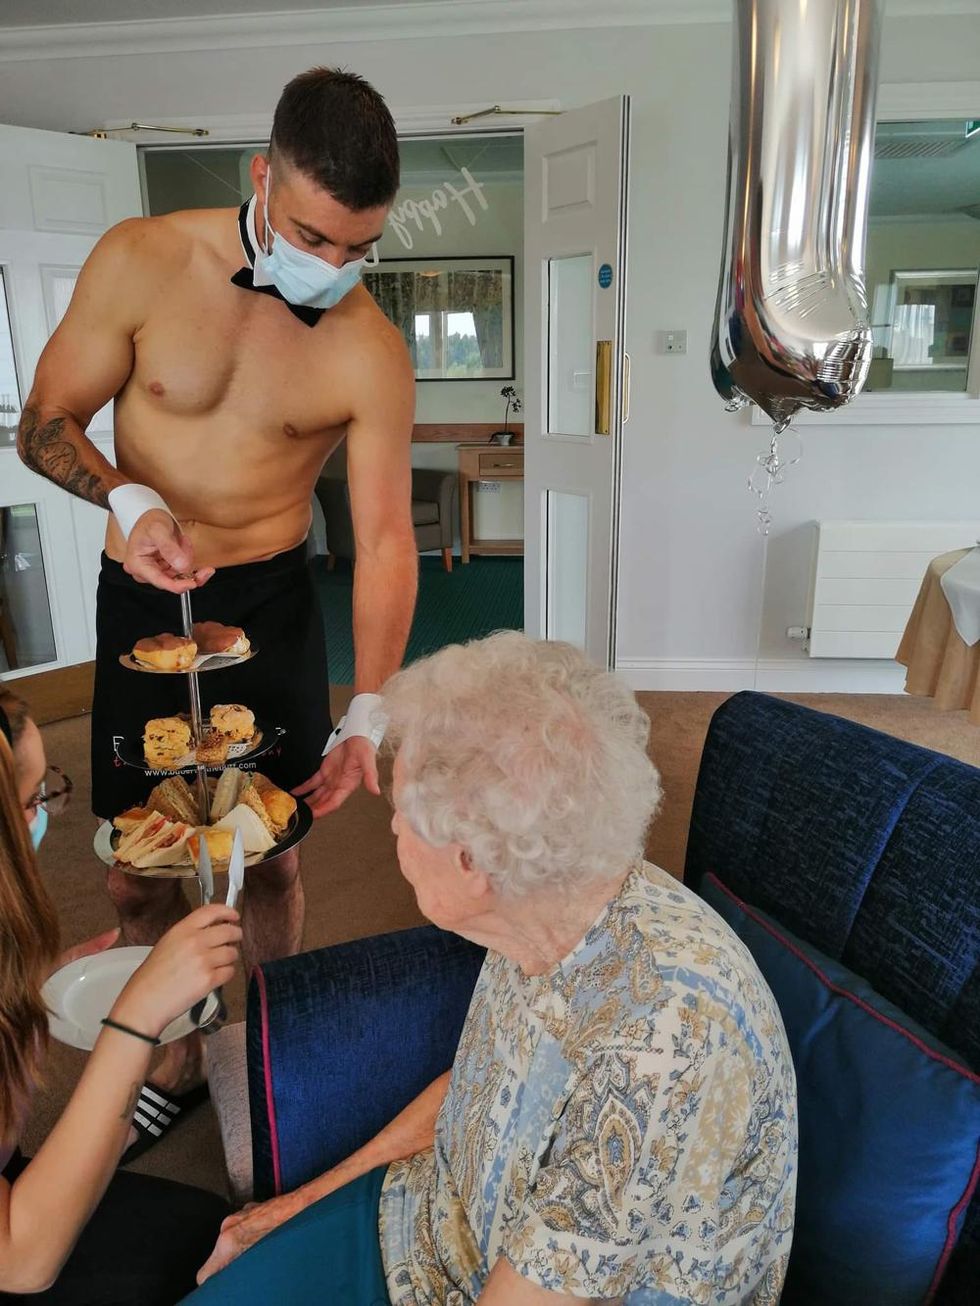 106-year-old granny celebrates her birthday with a naked butler